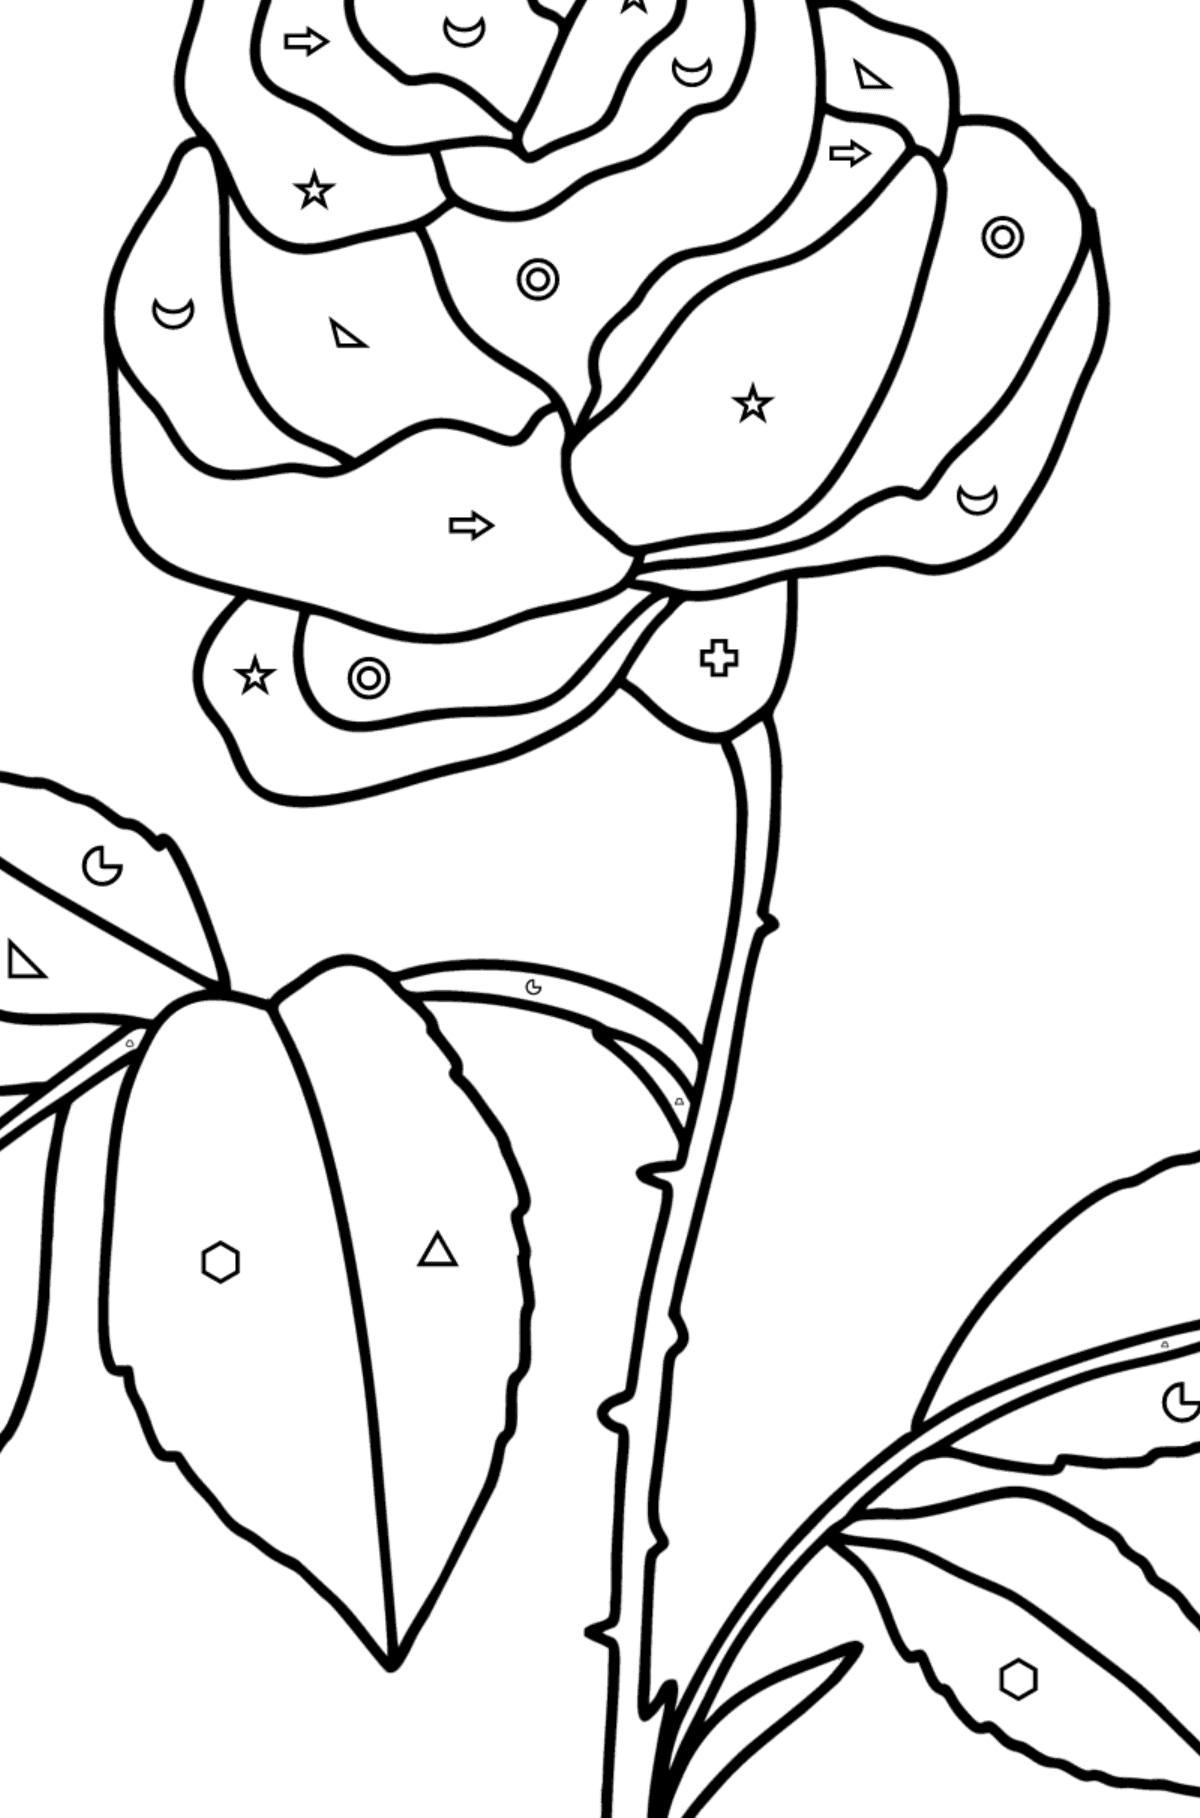 Red rose coloring page - Coloring by Geometric Shapes for Kids